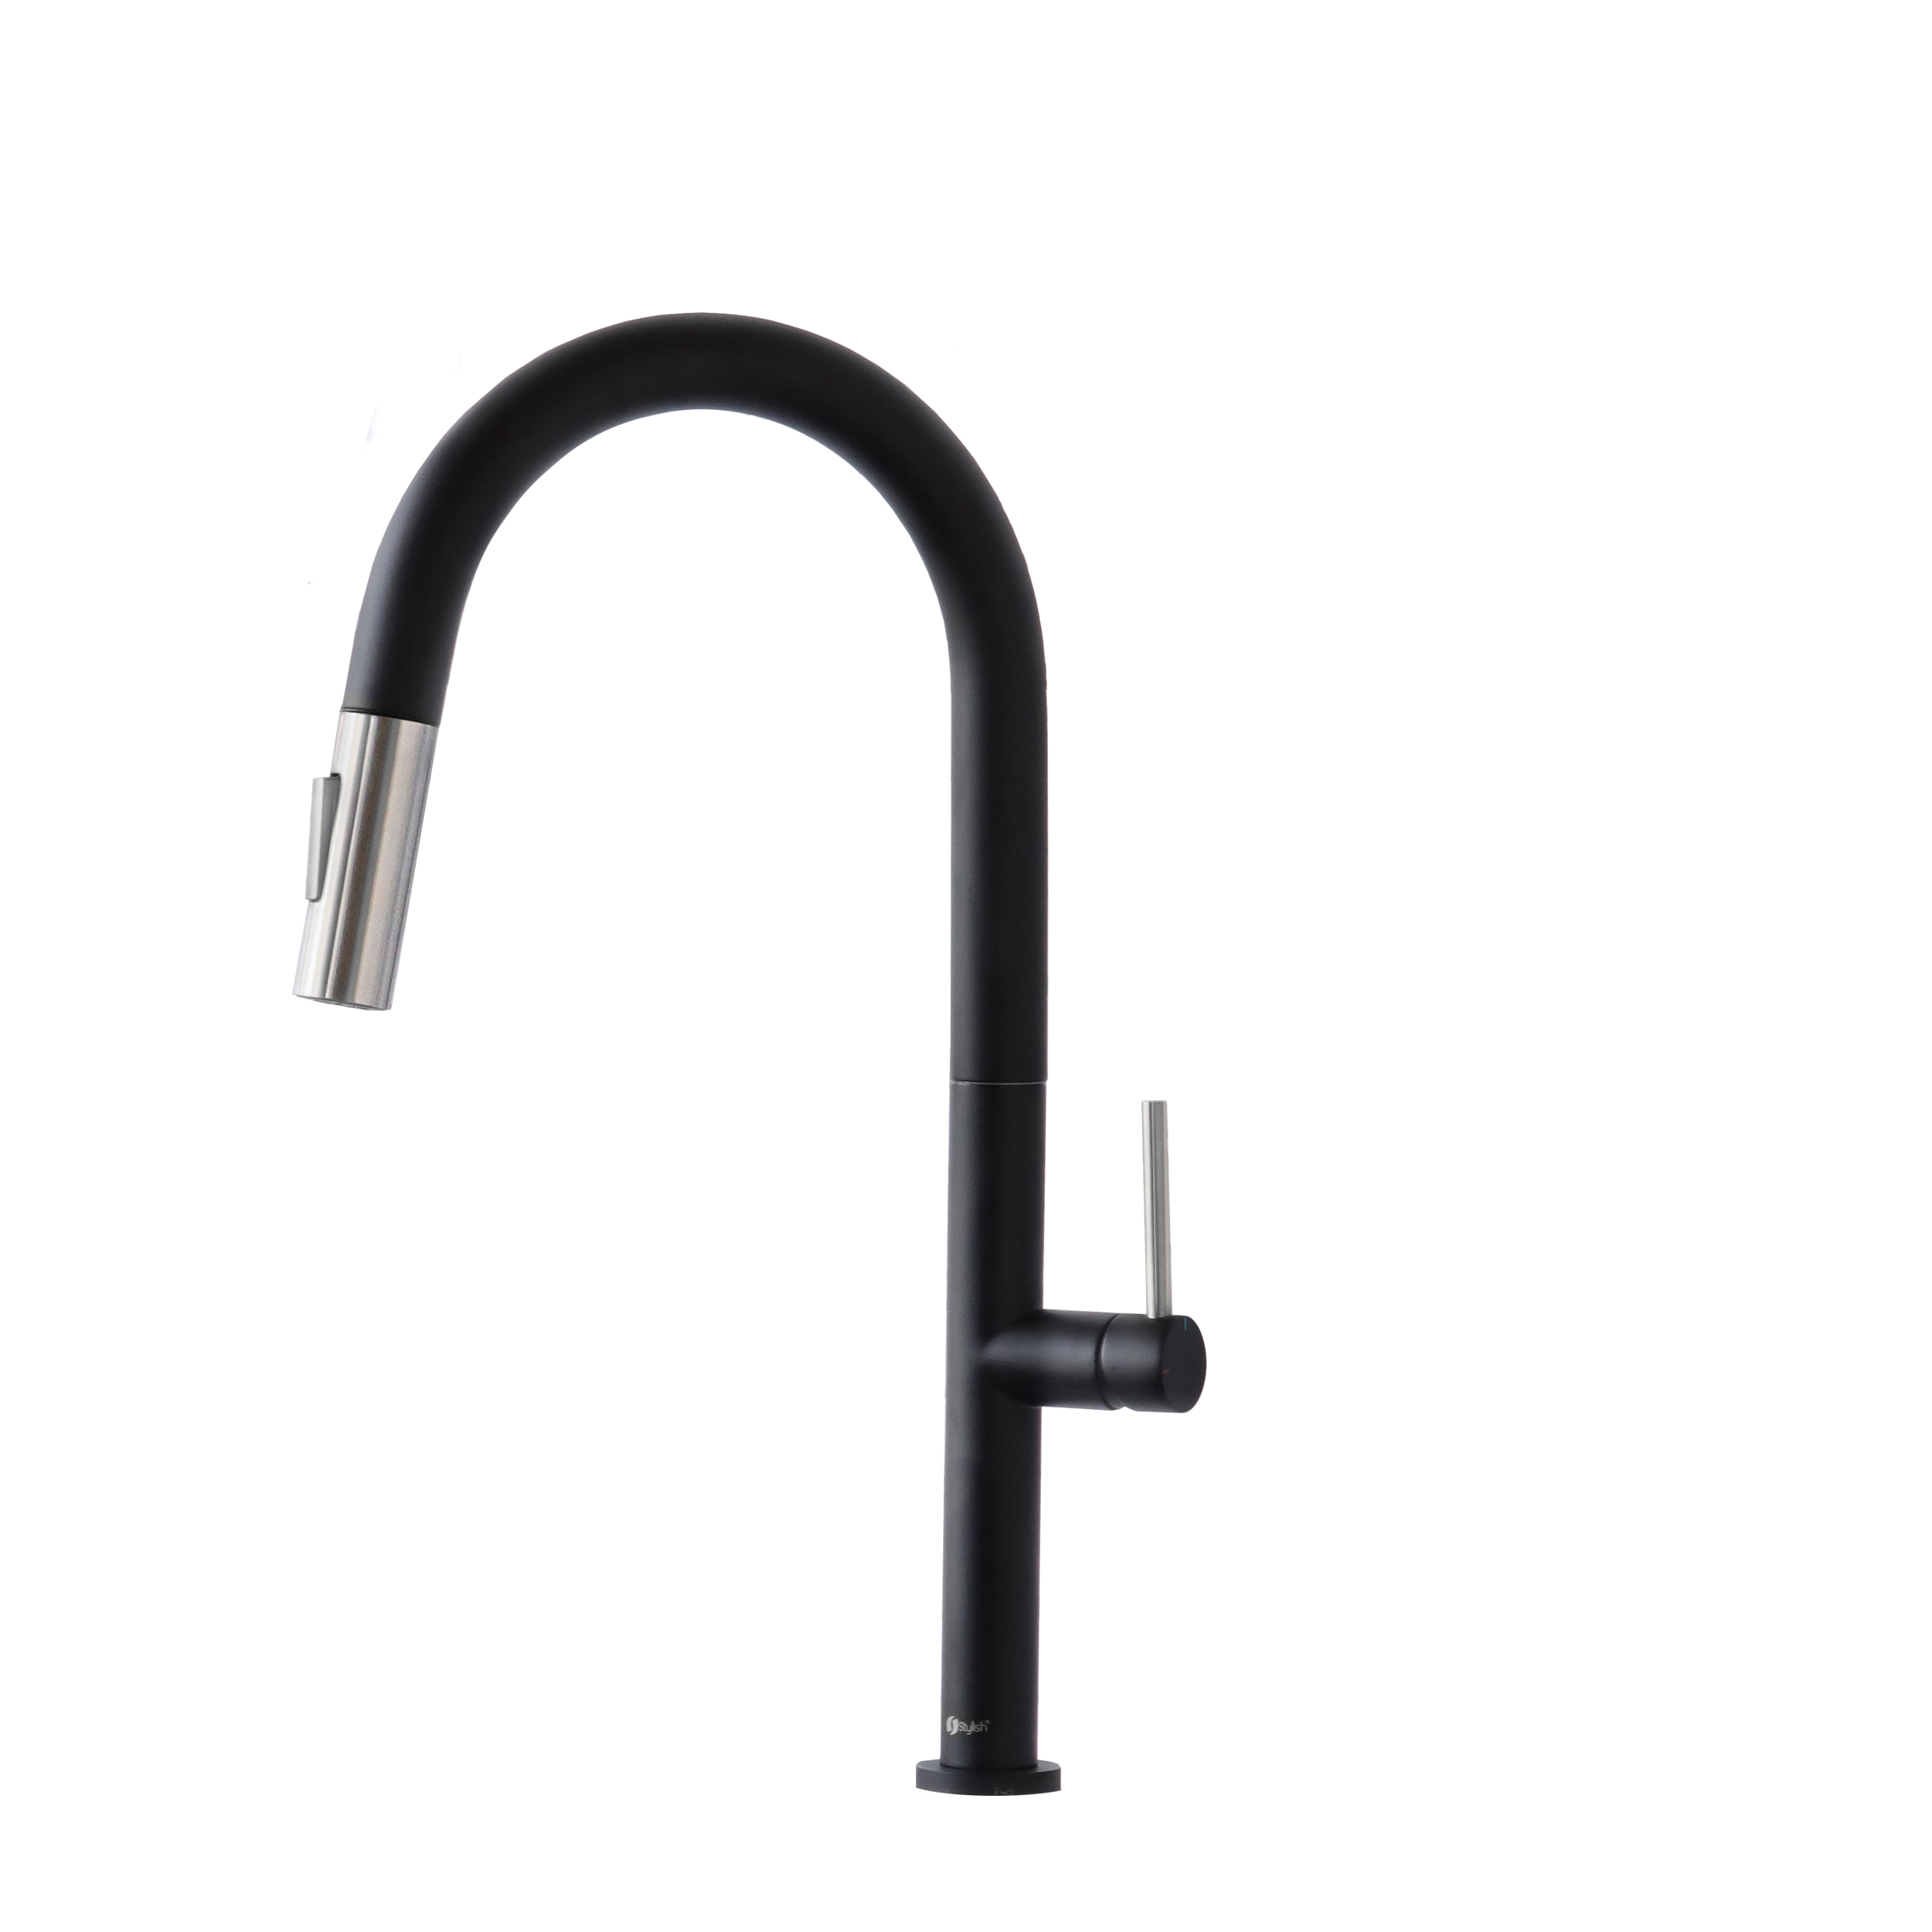 STYLISH Kitchen Sink Faucet Dual Mode Stainless Steel Matte Black with Brushed Head and Handle Finish K-141NS